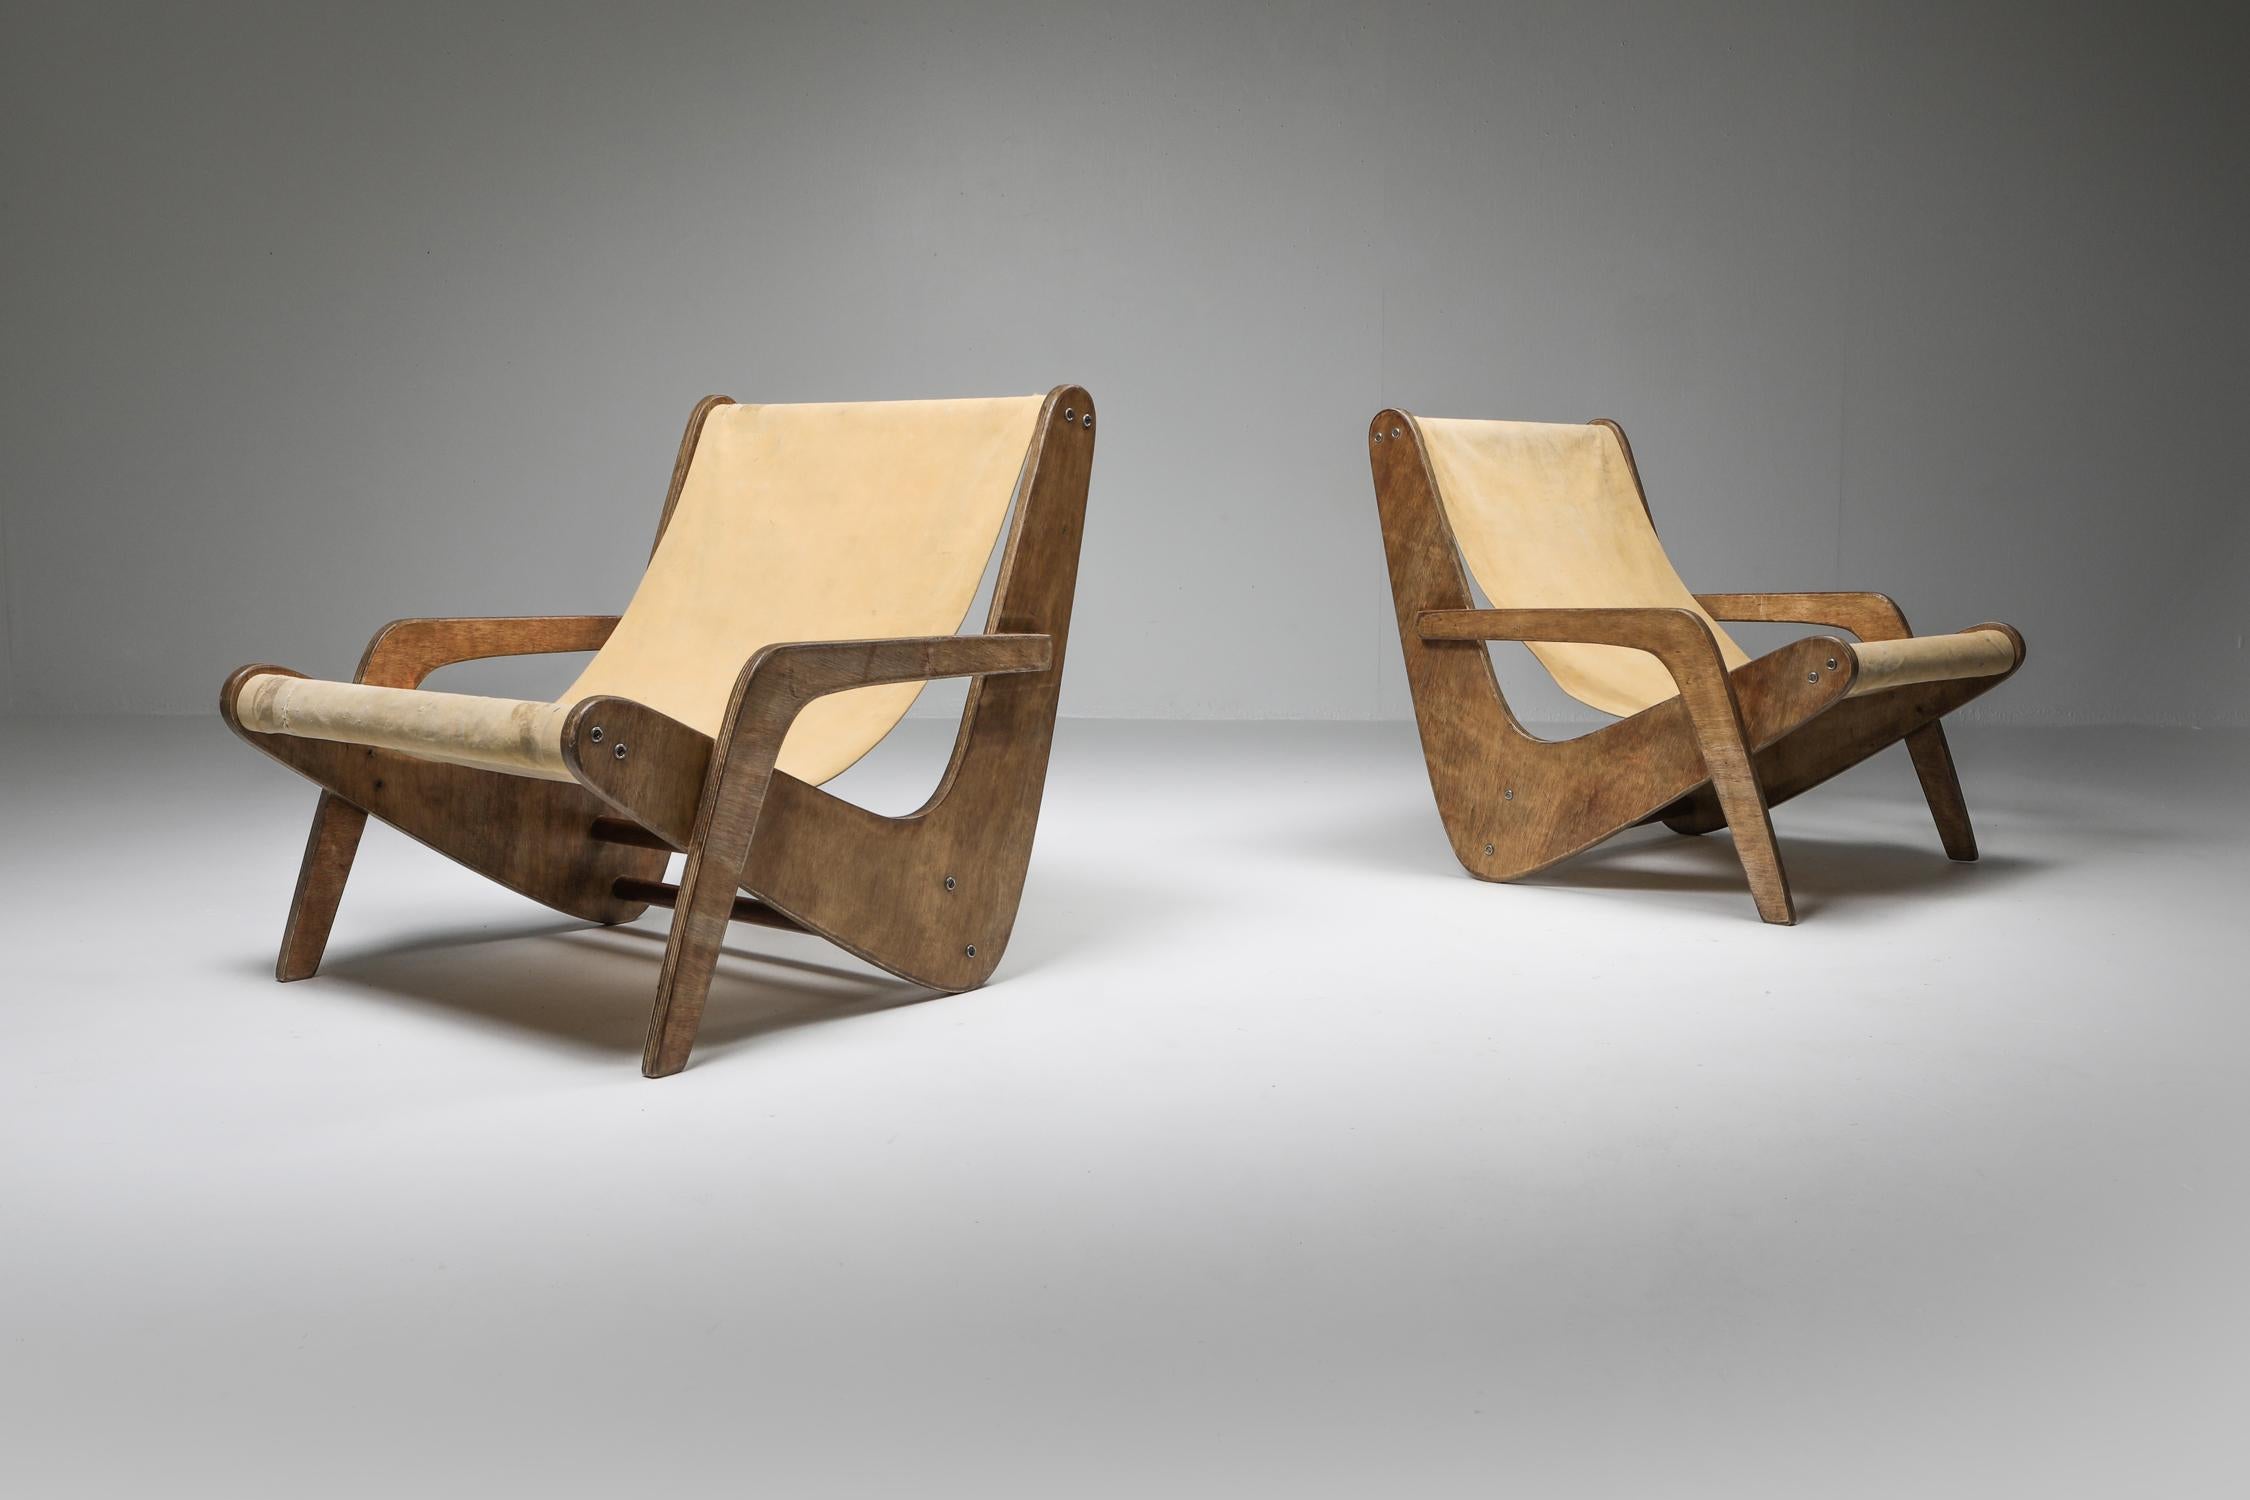 Jose Zanine Caldas, boomerang lounge chairs, Mòveis Artisticos Z, Brasil, circa 1950s

Important chairs in original condition.
Personally I believe it to be the utmost importance of keeping these museum quality pieces as they are; 'dans son